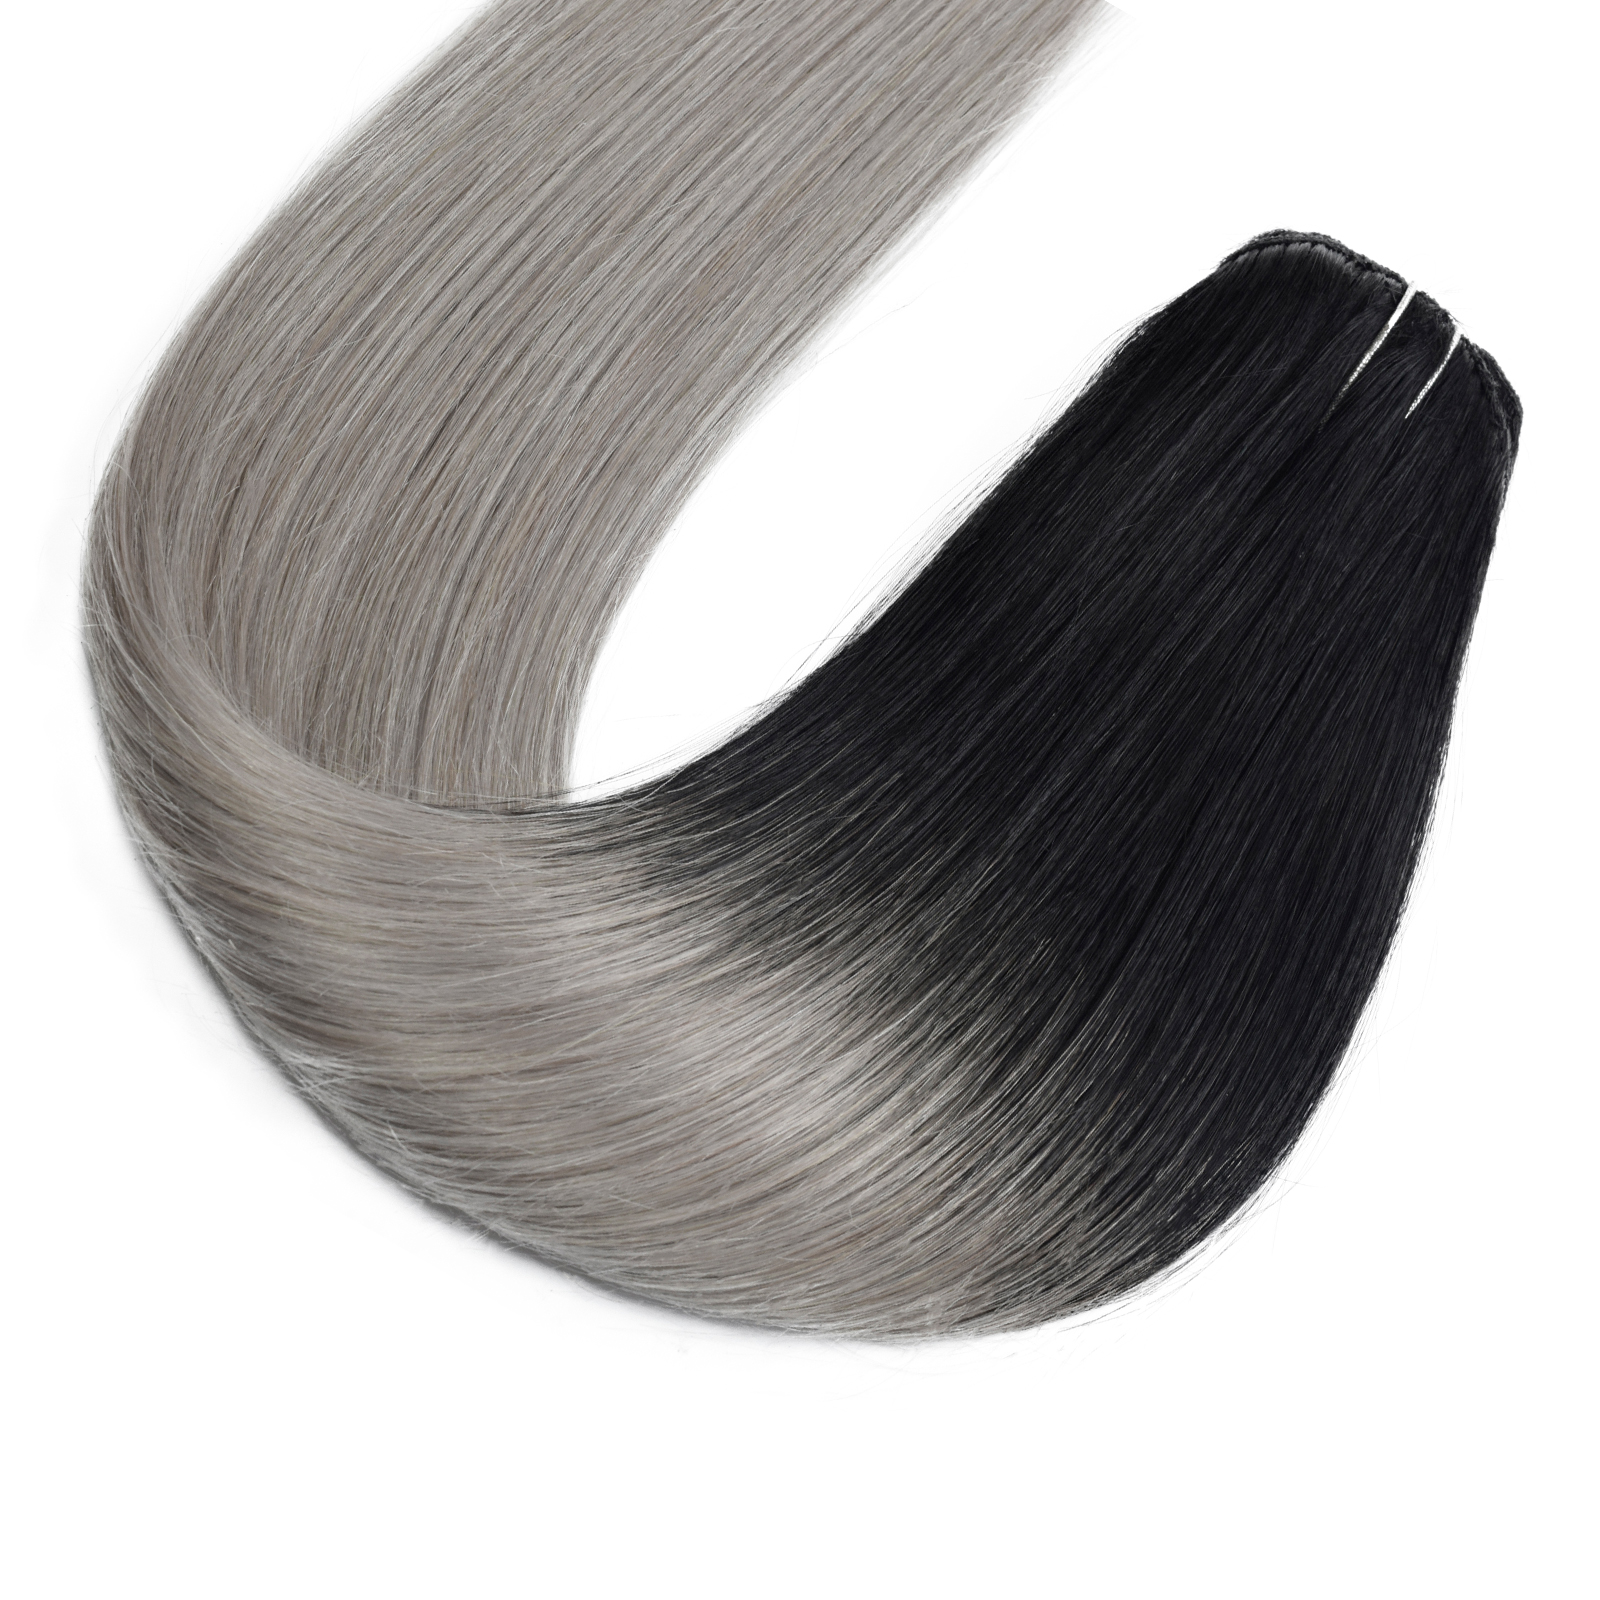 Clip in Hair Extensions Ombre 1 to Grey is available from hair100!